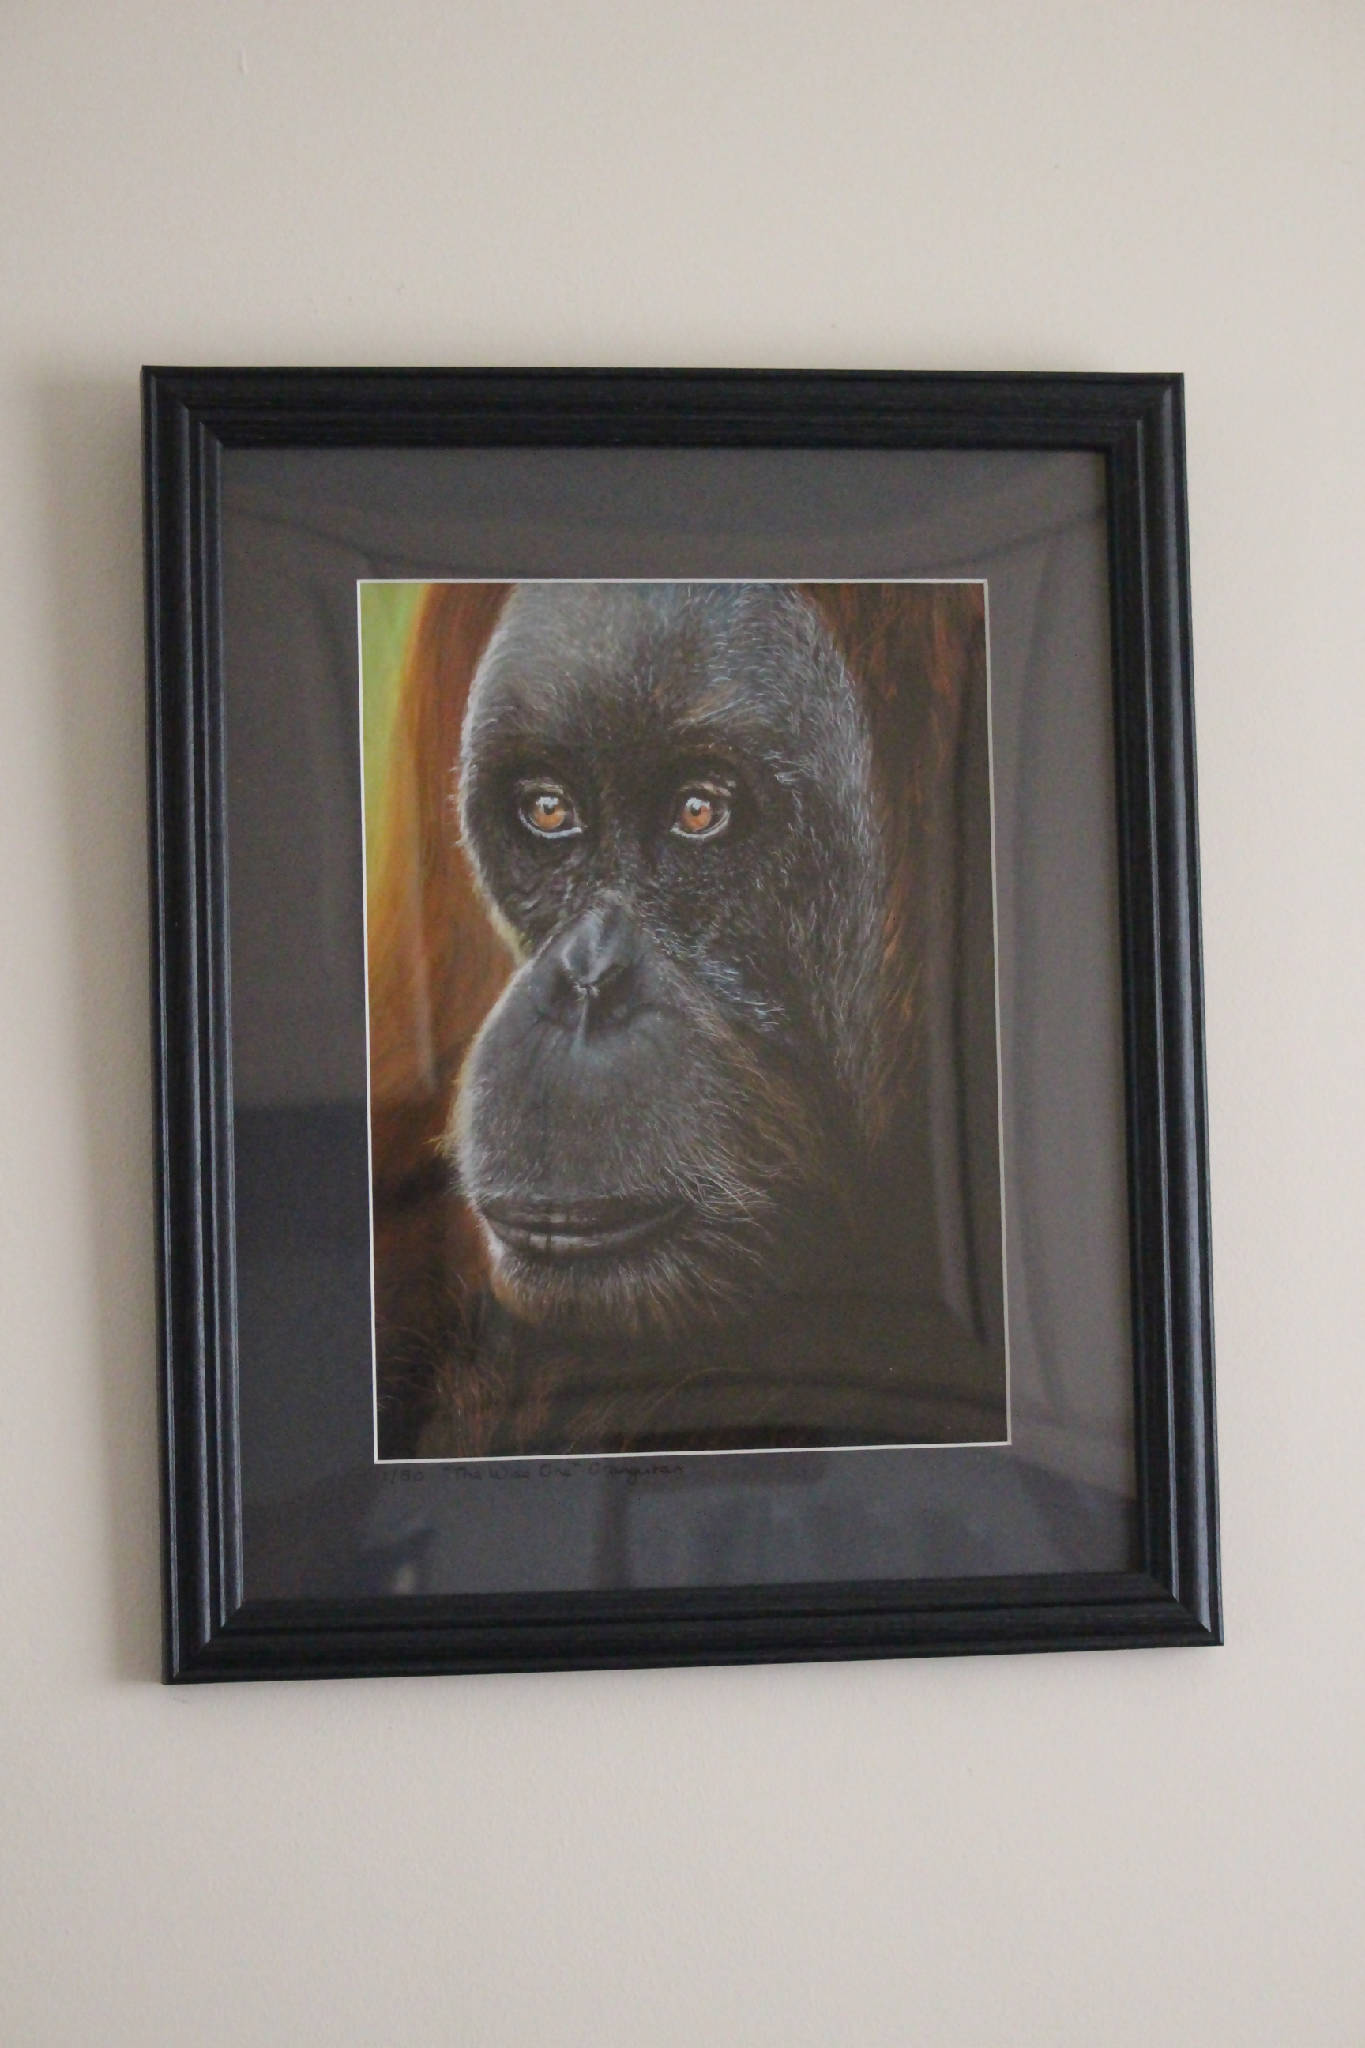 "The Wise One" Orangutan Limited Edition Giclee Print